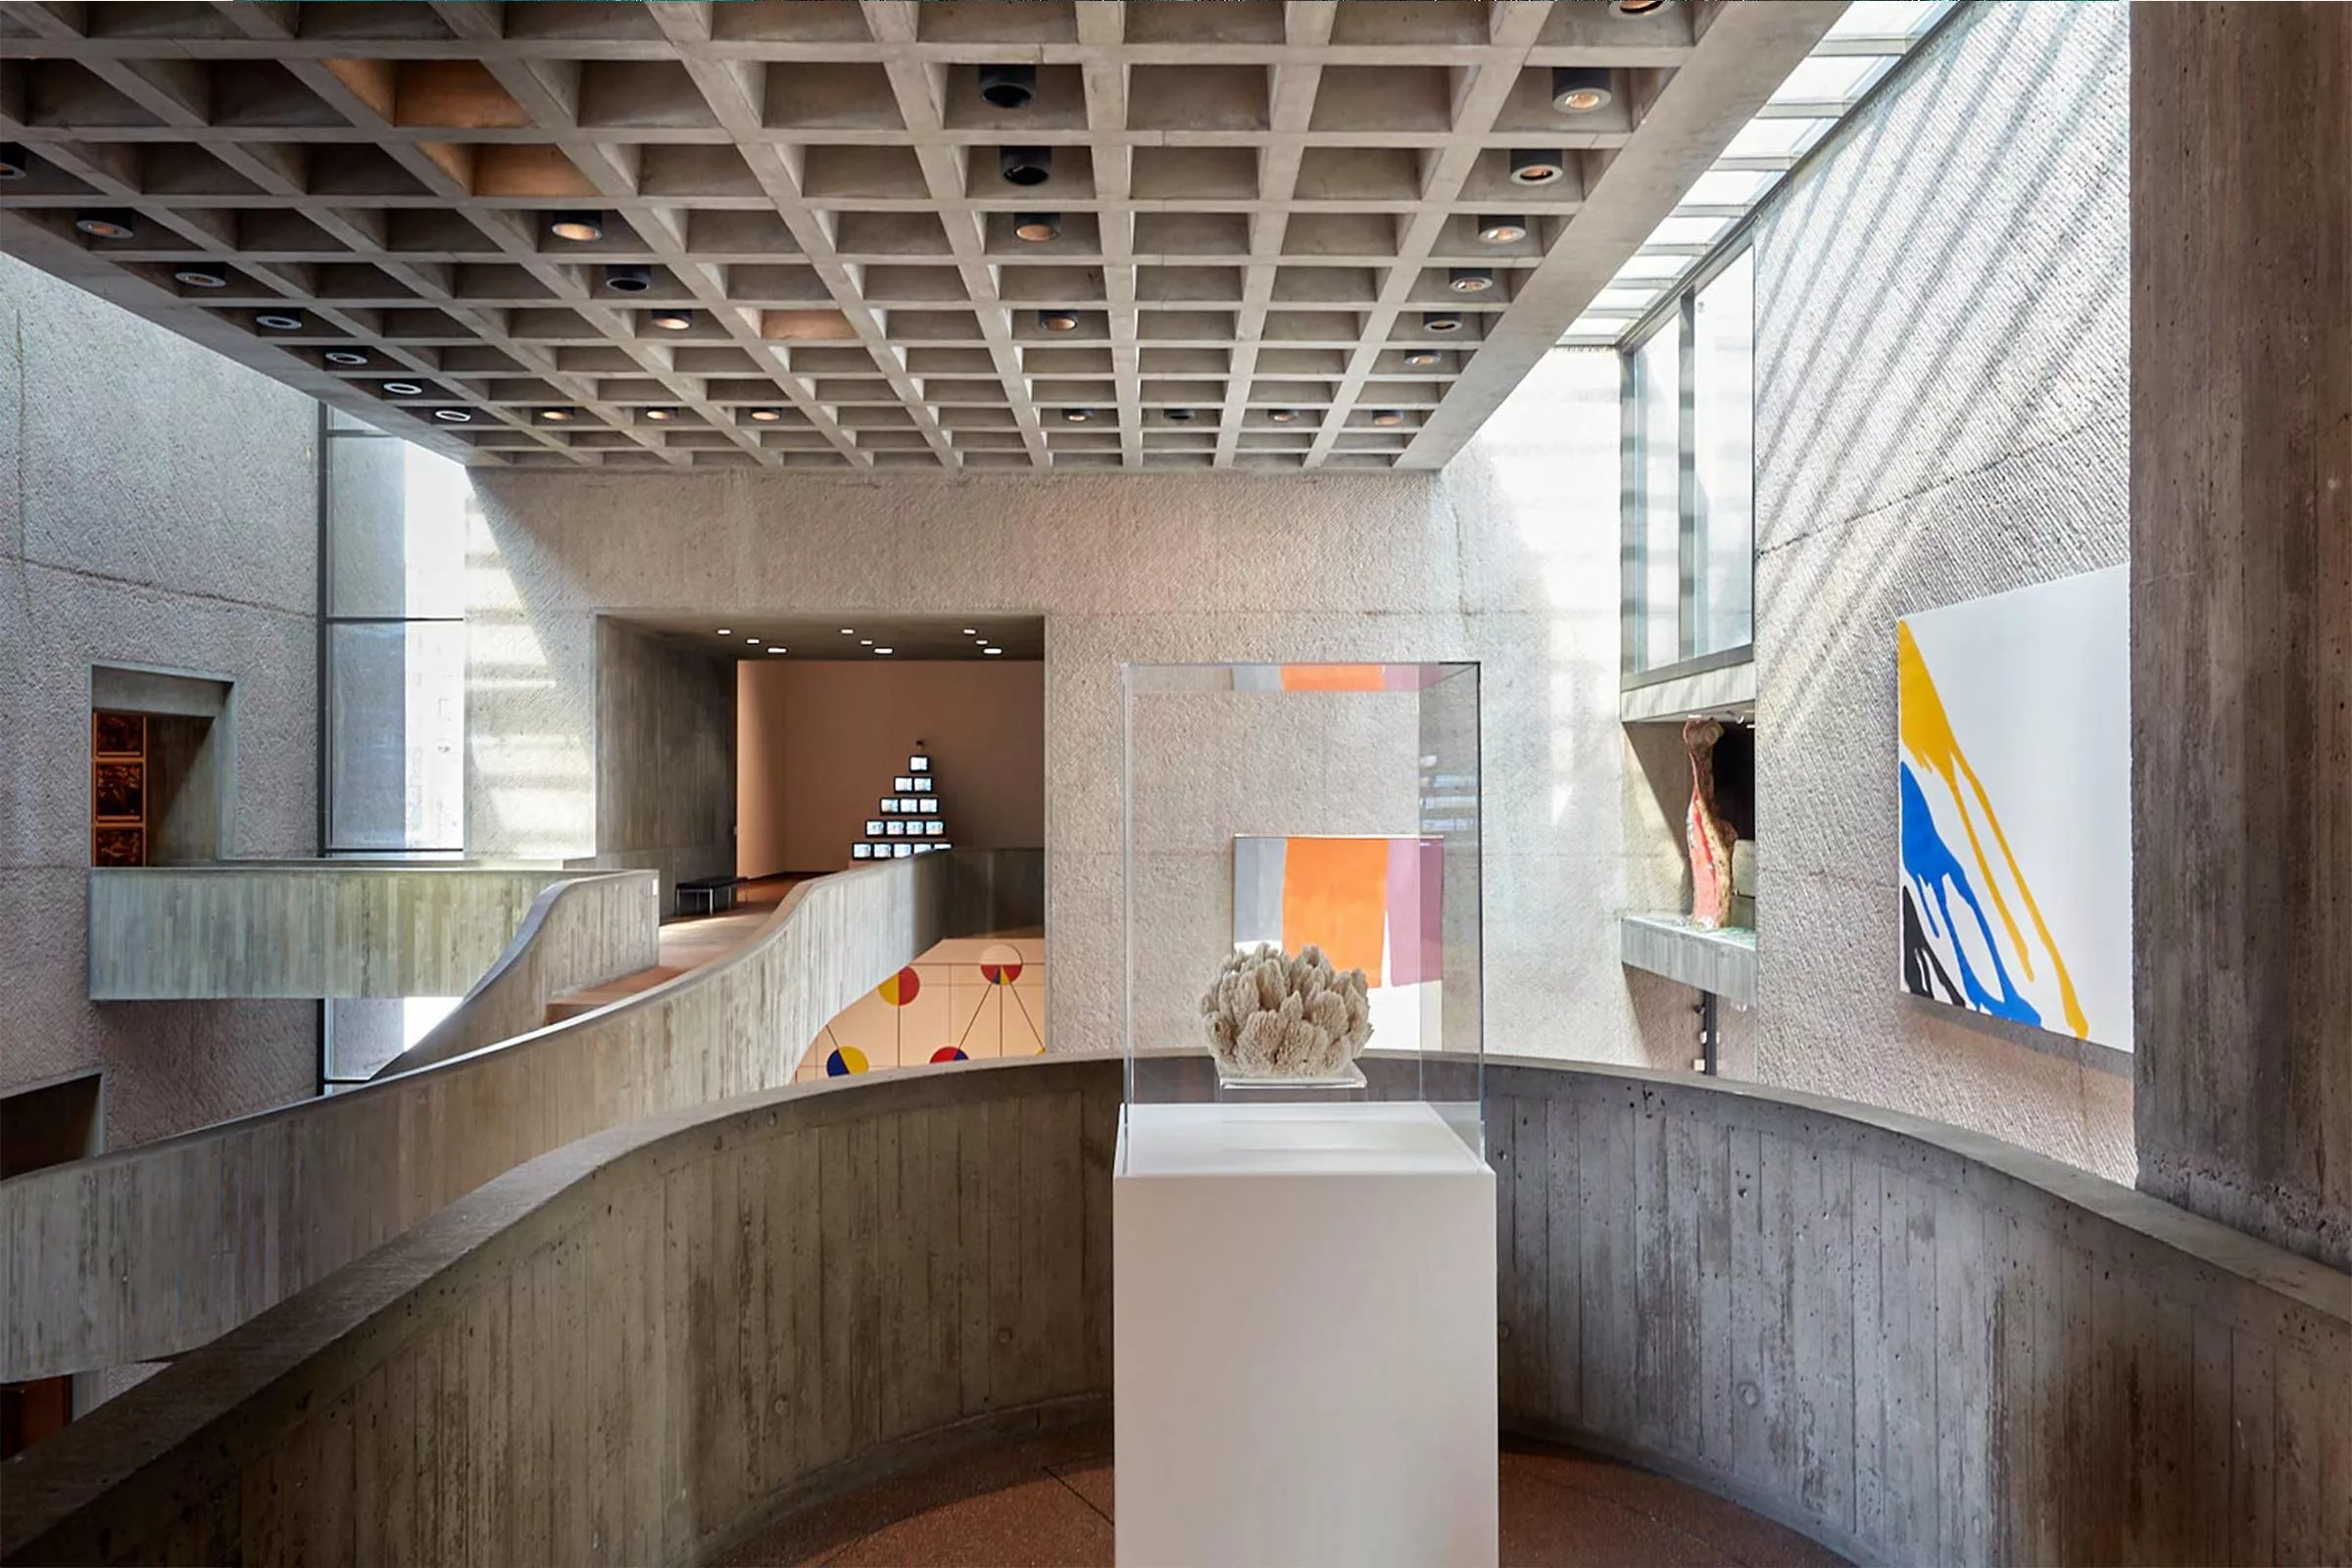 Exhibition photograph of an architectural view of the interior of a museum with concrete walls and multiple artworks on display.